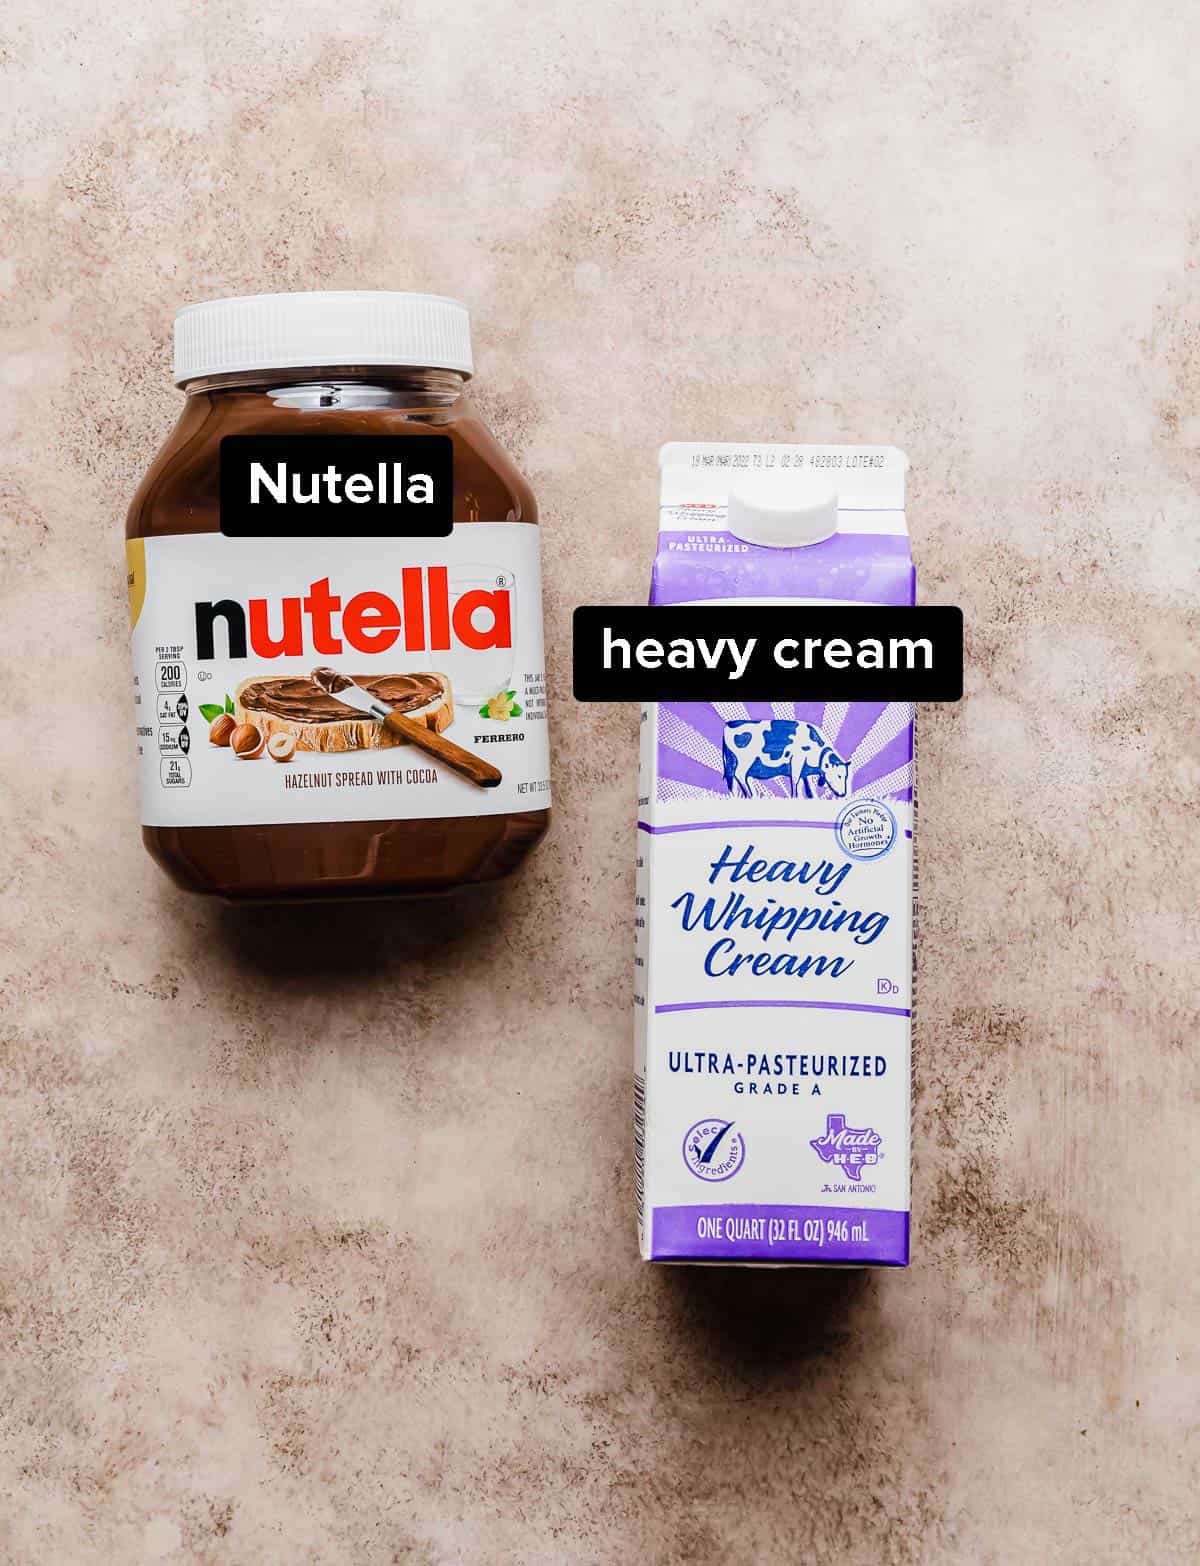 A jar of Nutella and heavy whipping cream on a light brown background.